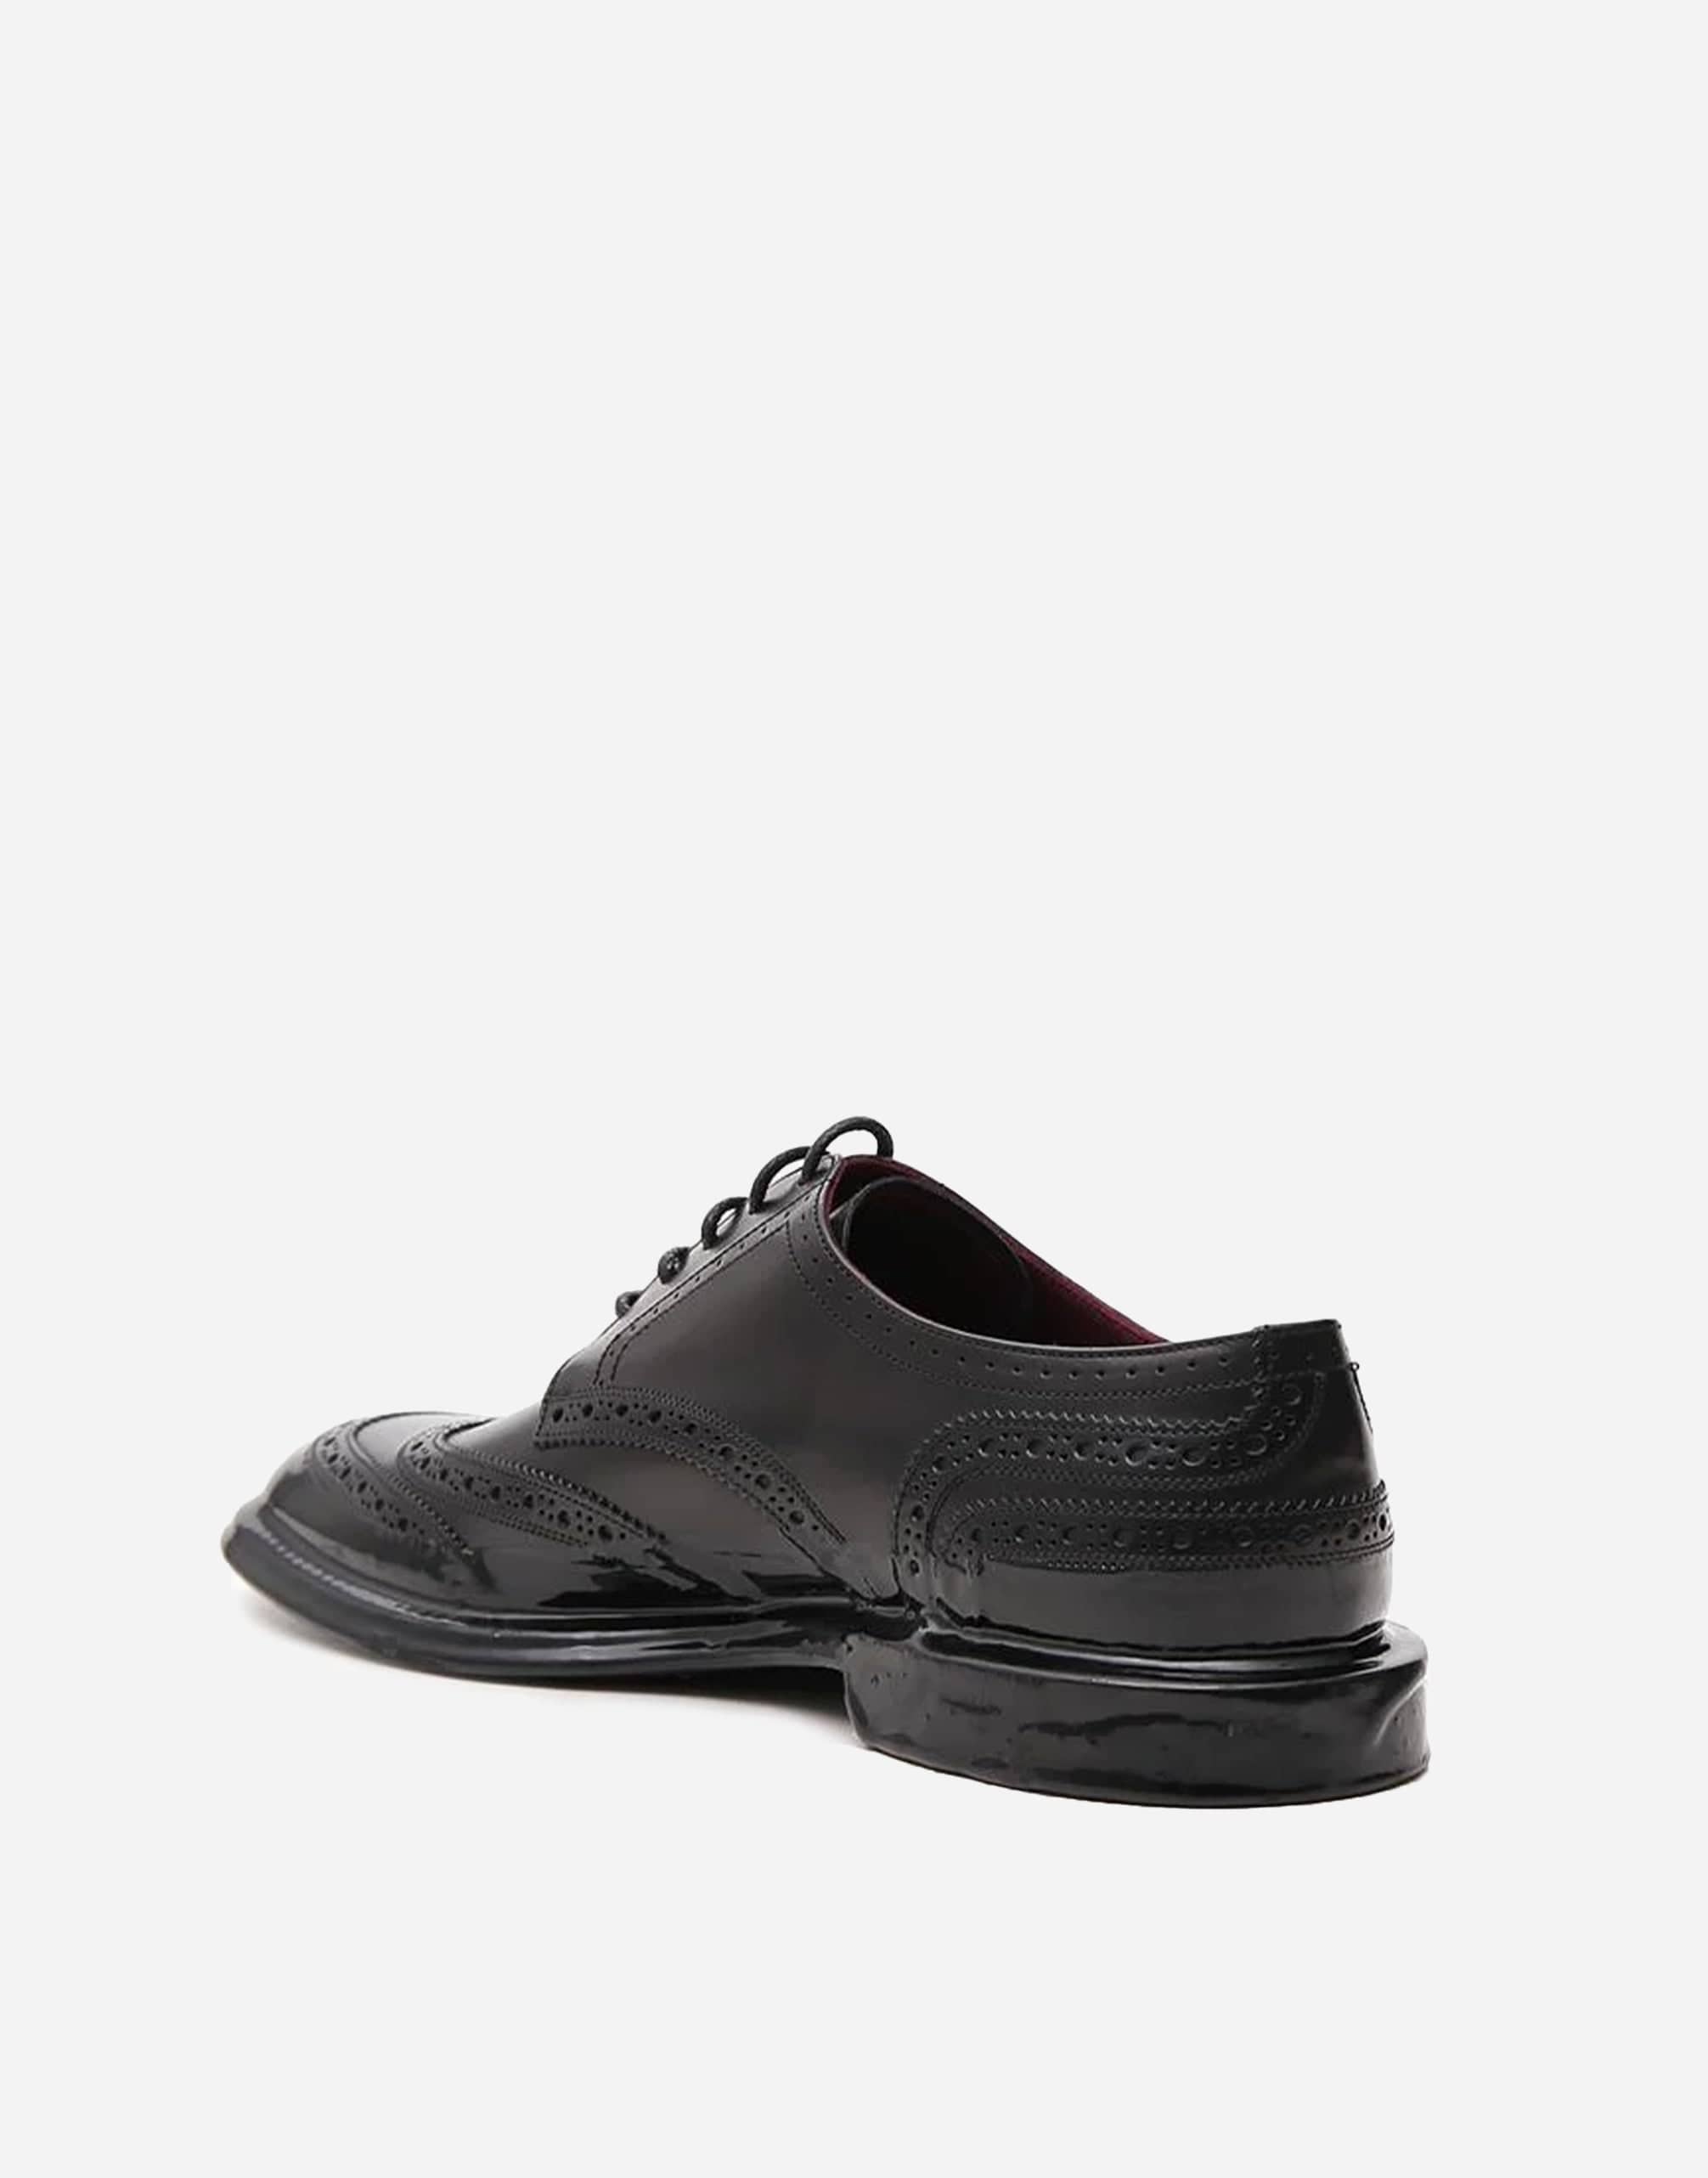 Dolce & Gabbana Lace-Up Oxford Derby Shoes